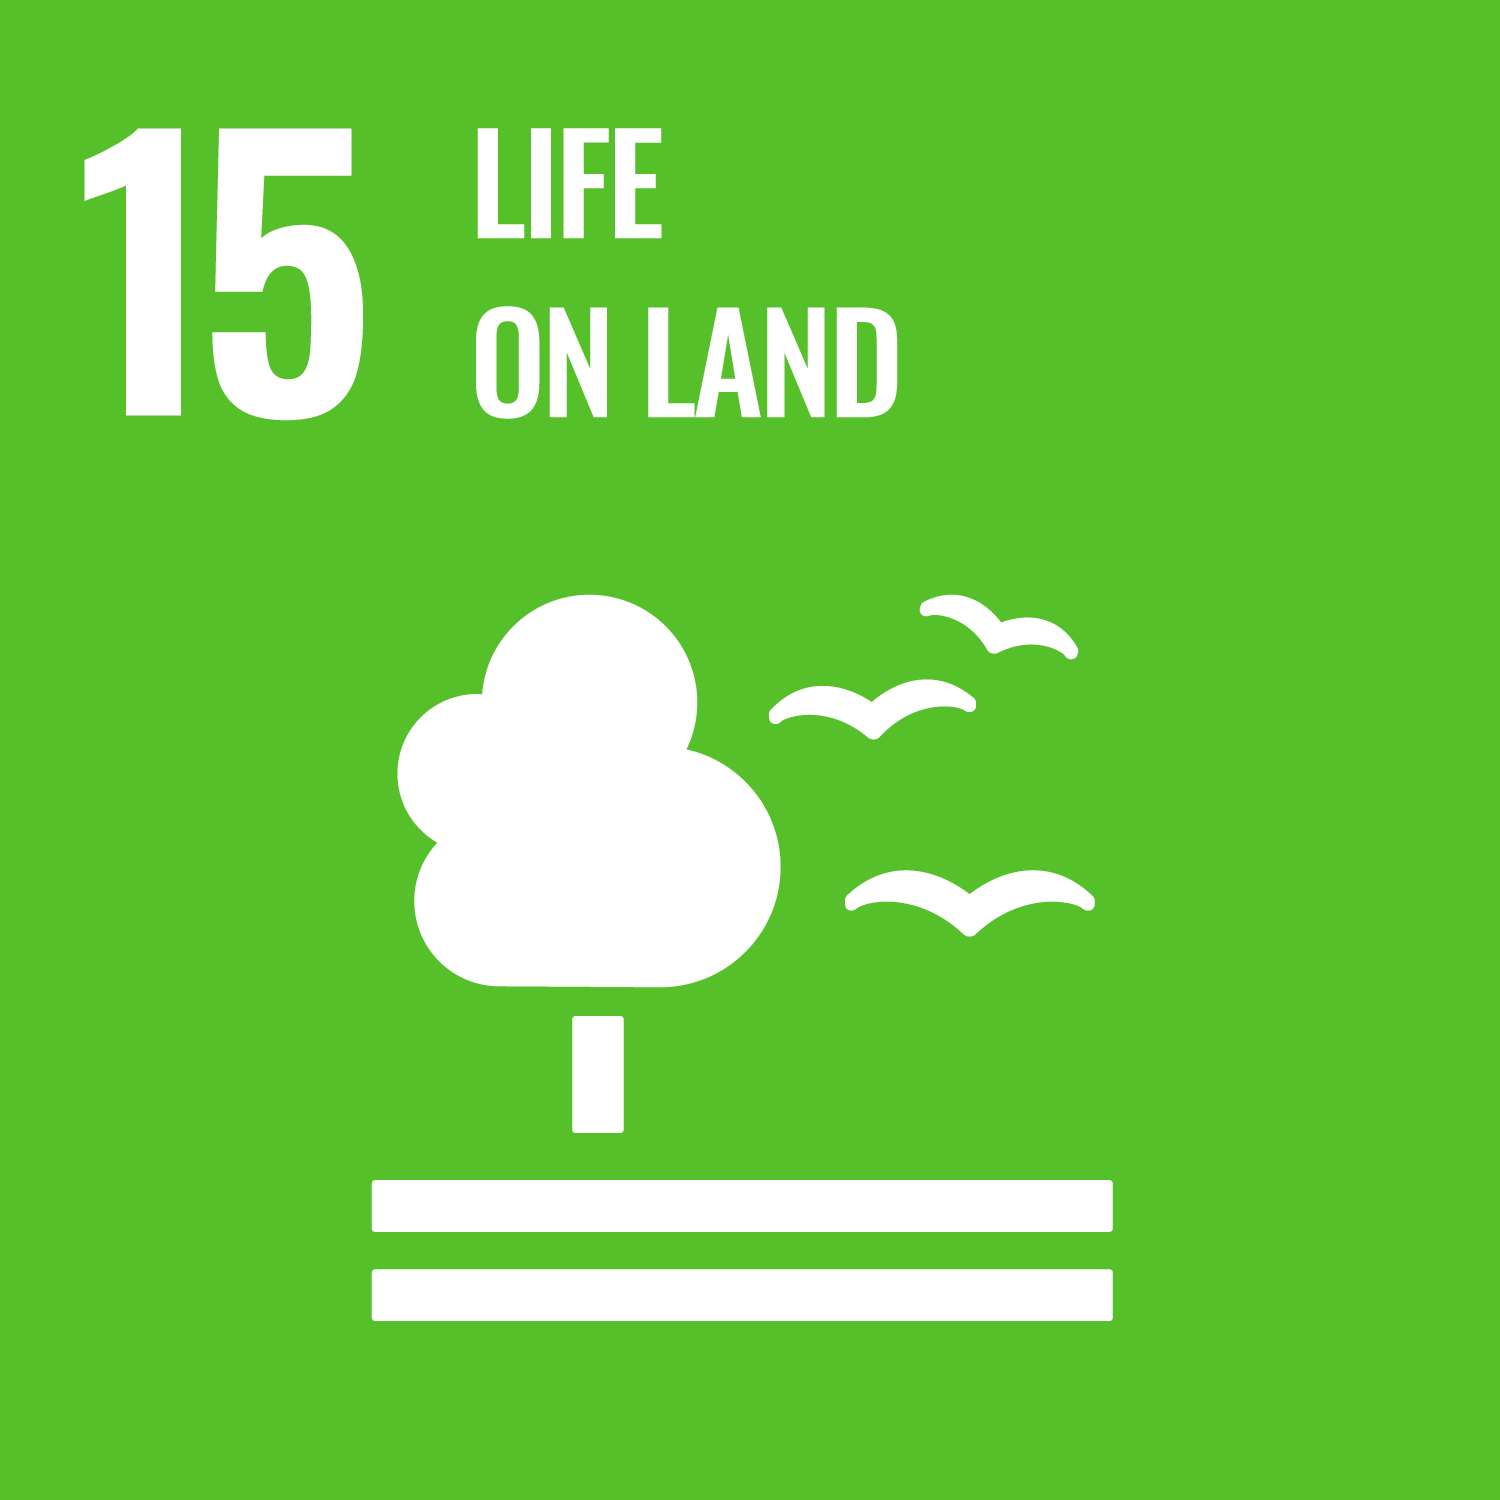 UN sustainable development goal number 15 Life on land. Link to goal number 15.